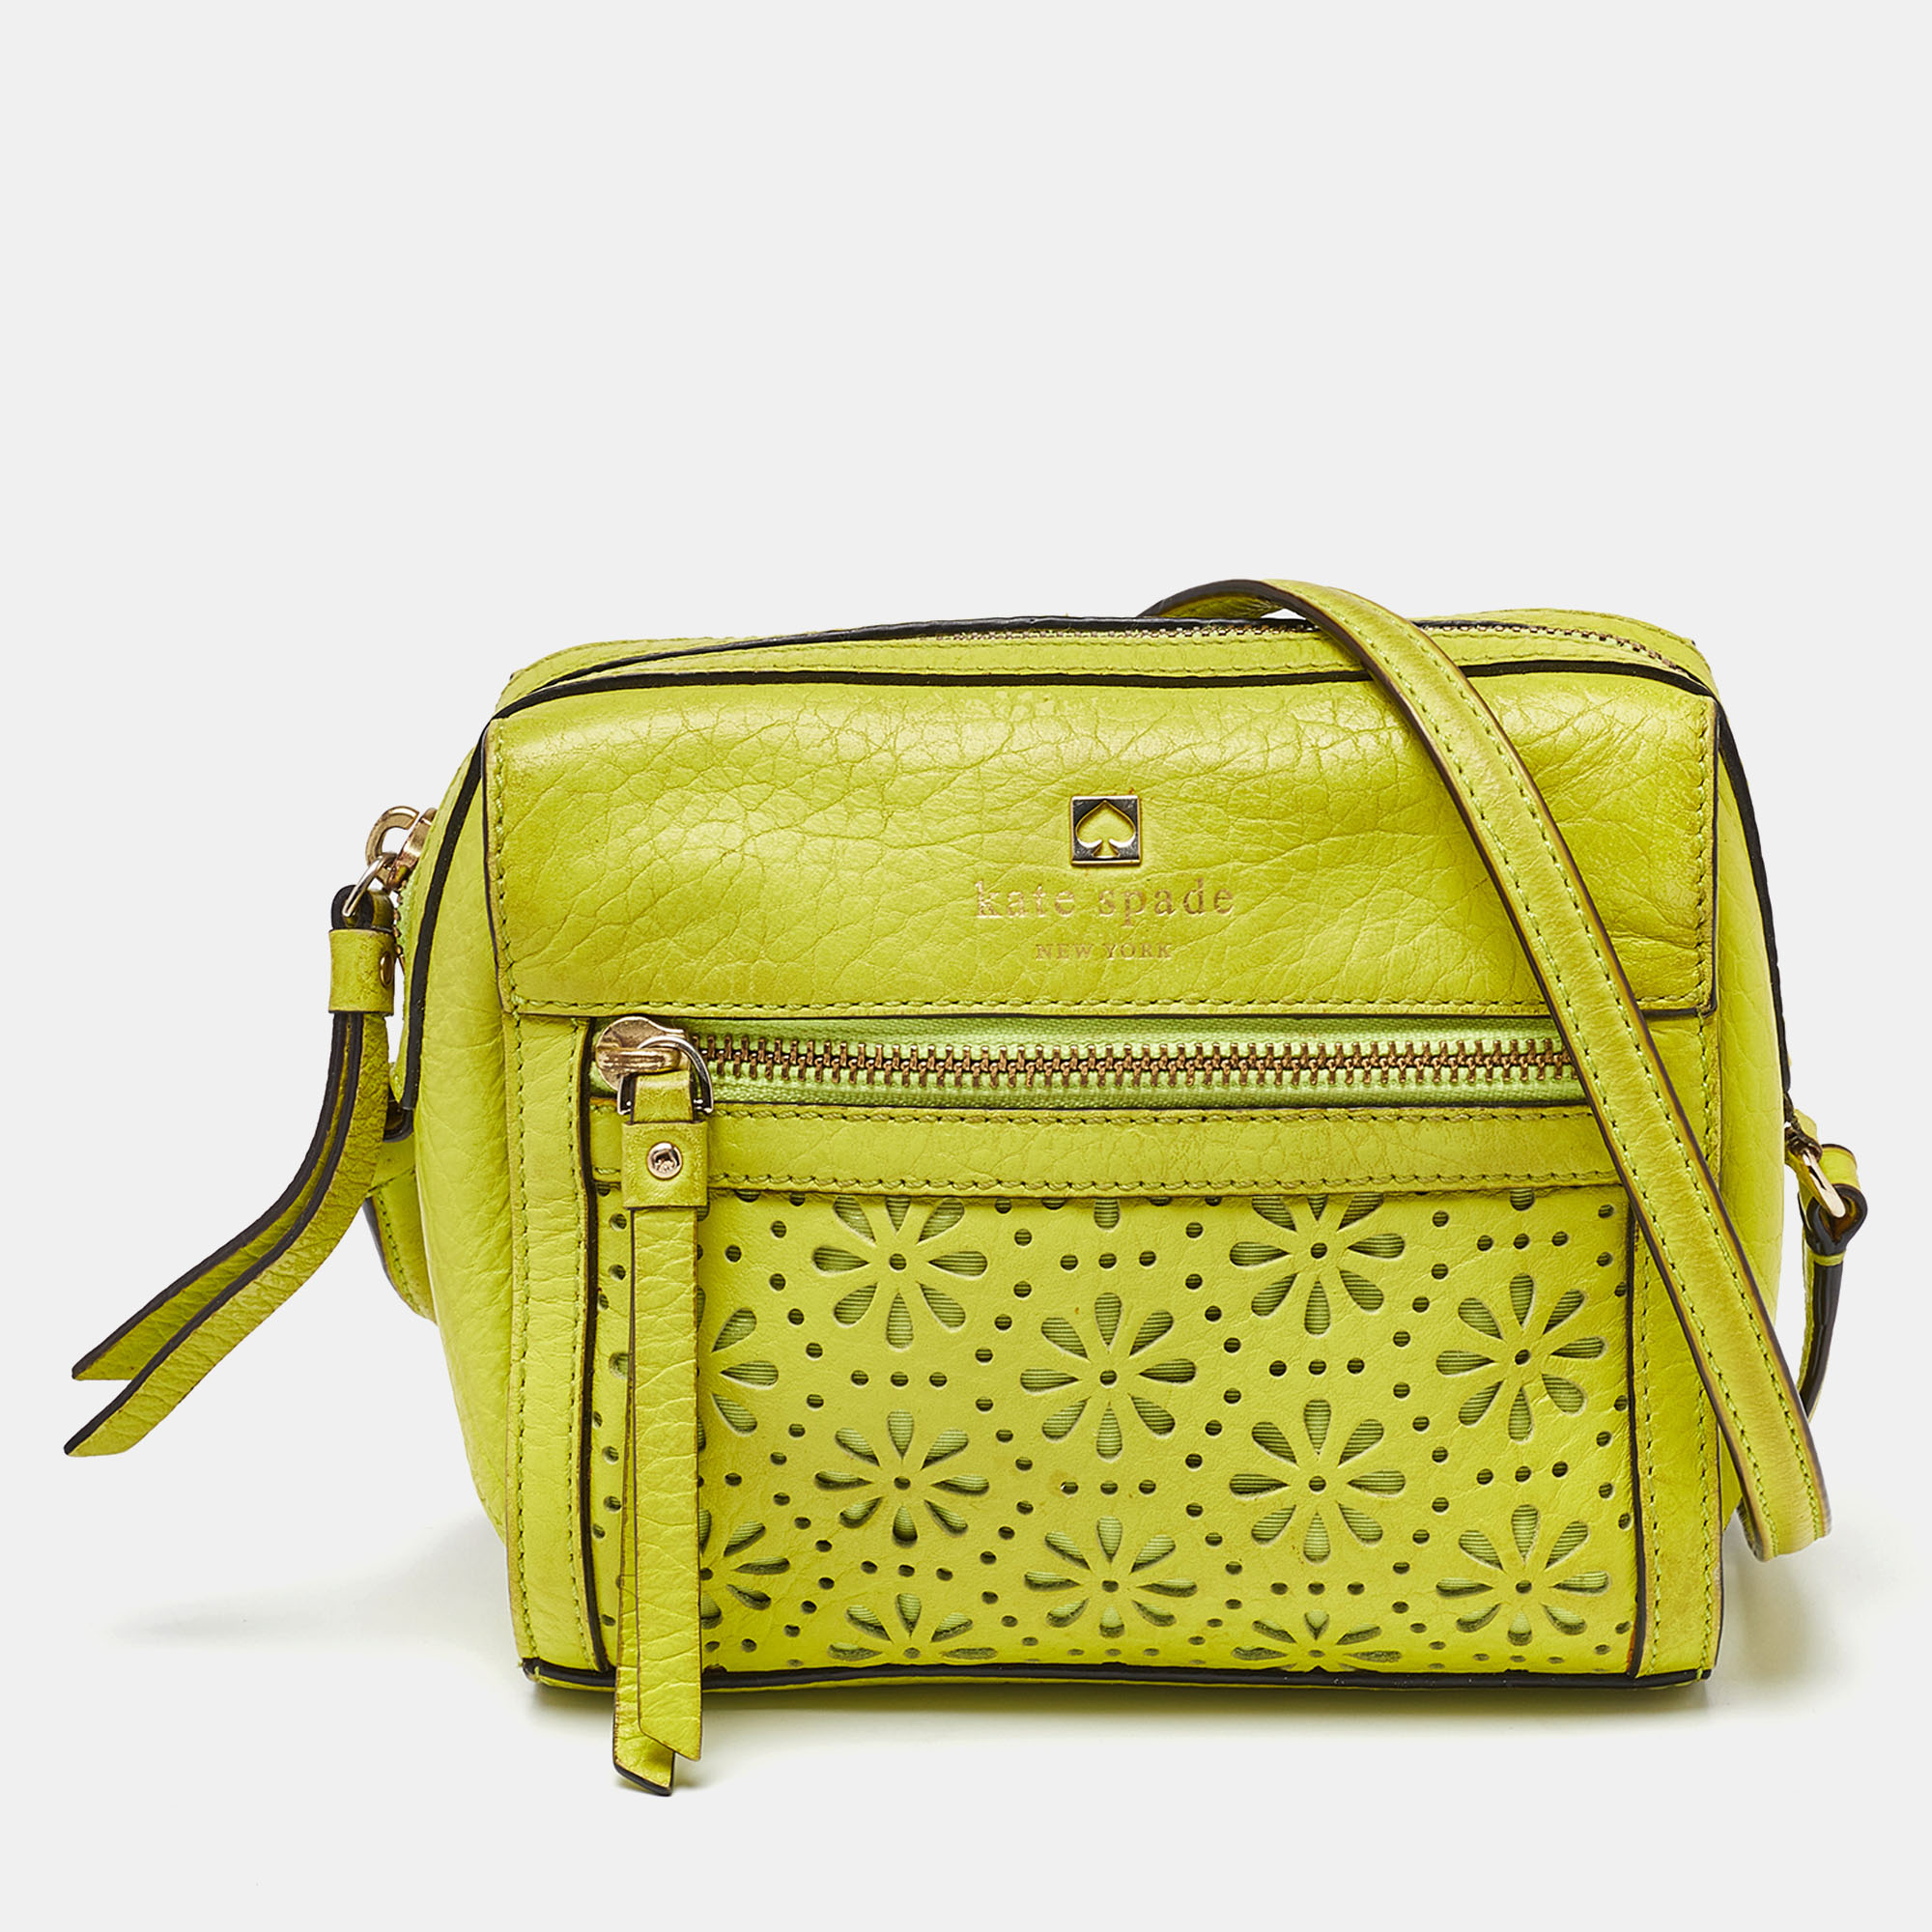 Pre-owned Kate Spade Green Leather Floral Lasercut Crossbody Bag